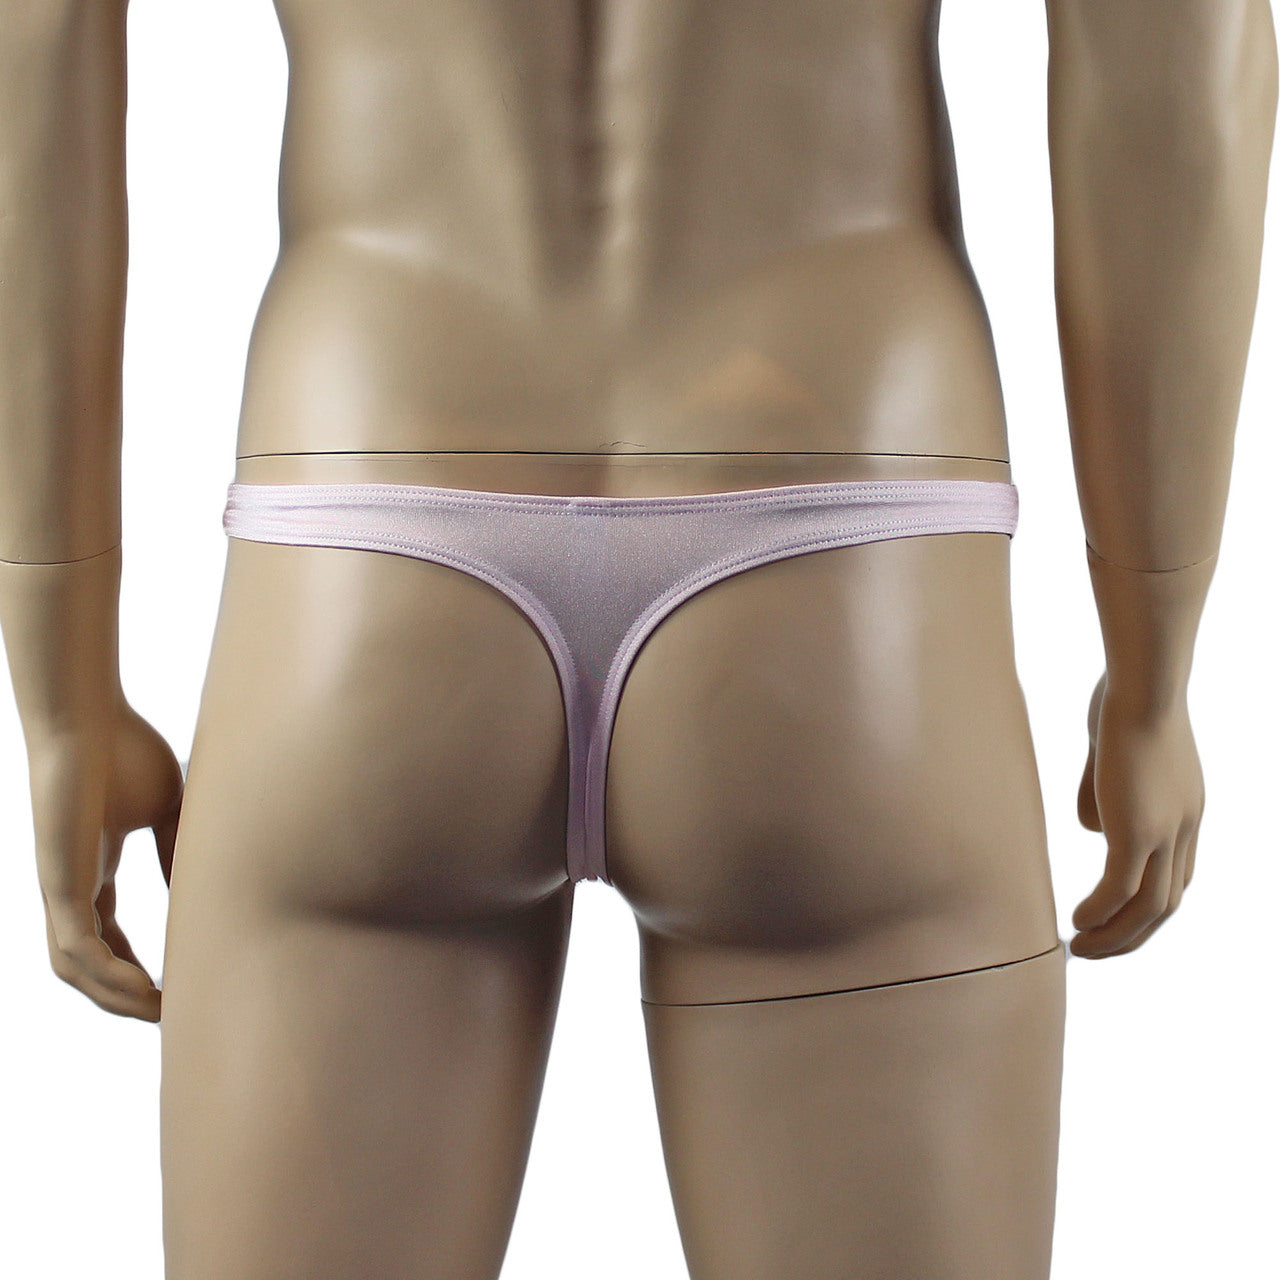 Mens Luxury Camisole and Bikini Brief with Garters & Stockings (pink plus other colours)